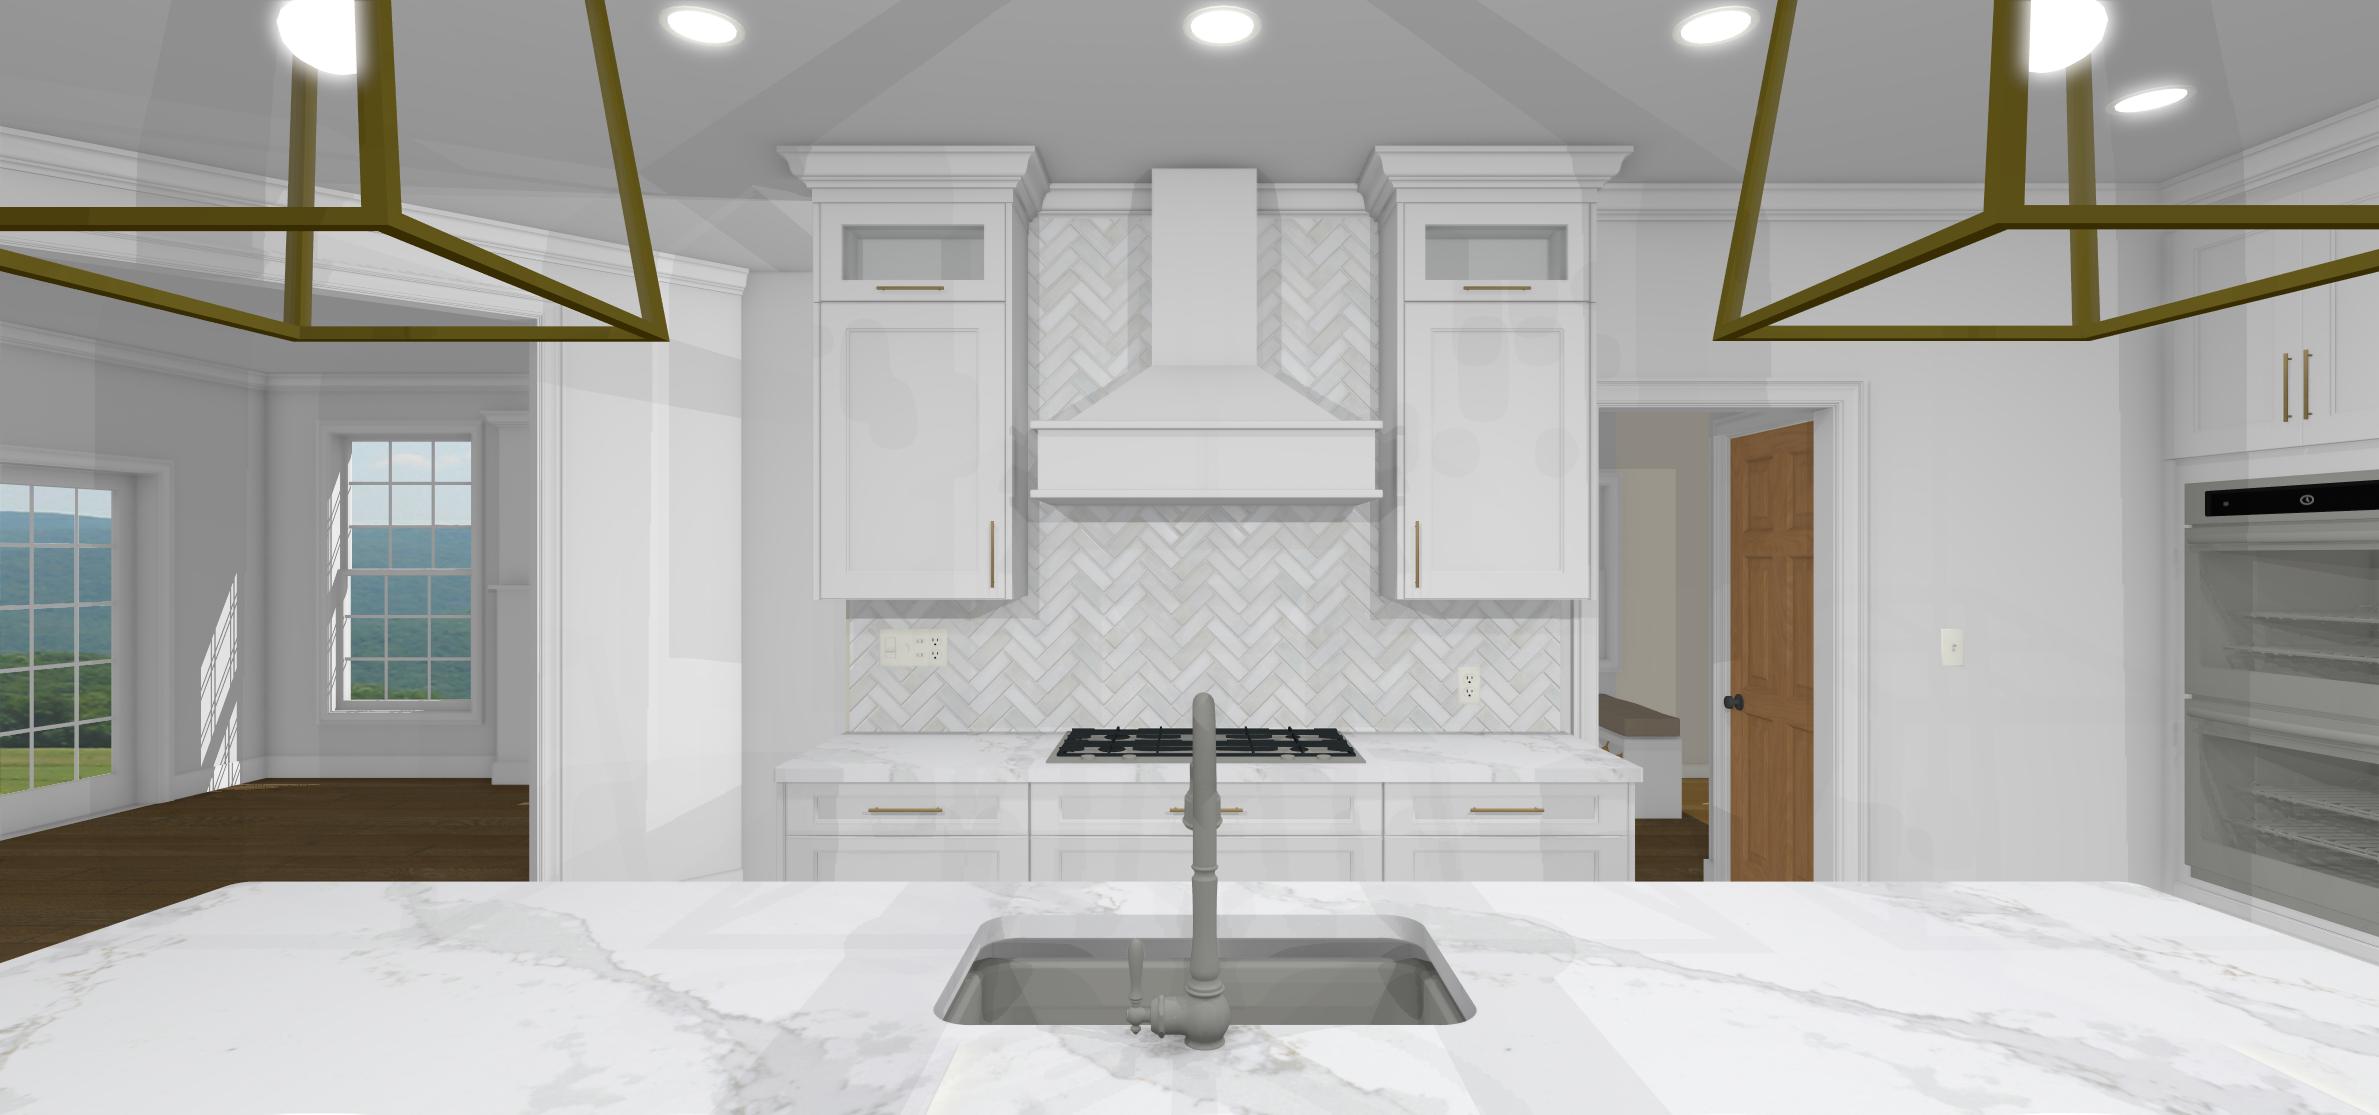 Kitchen Design with range and white vent hood